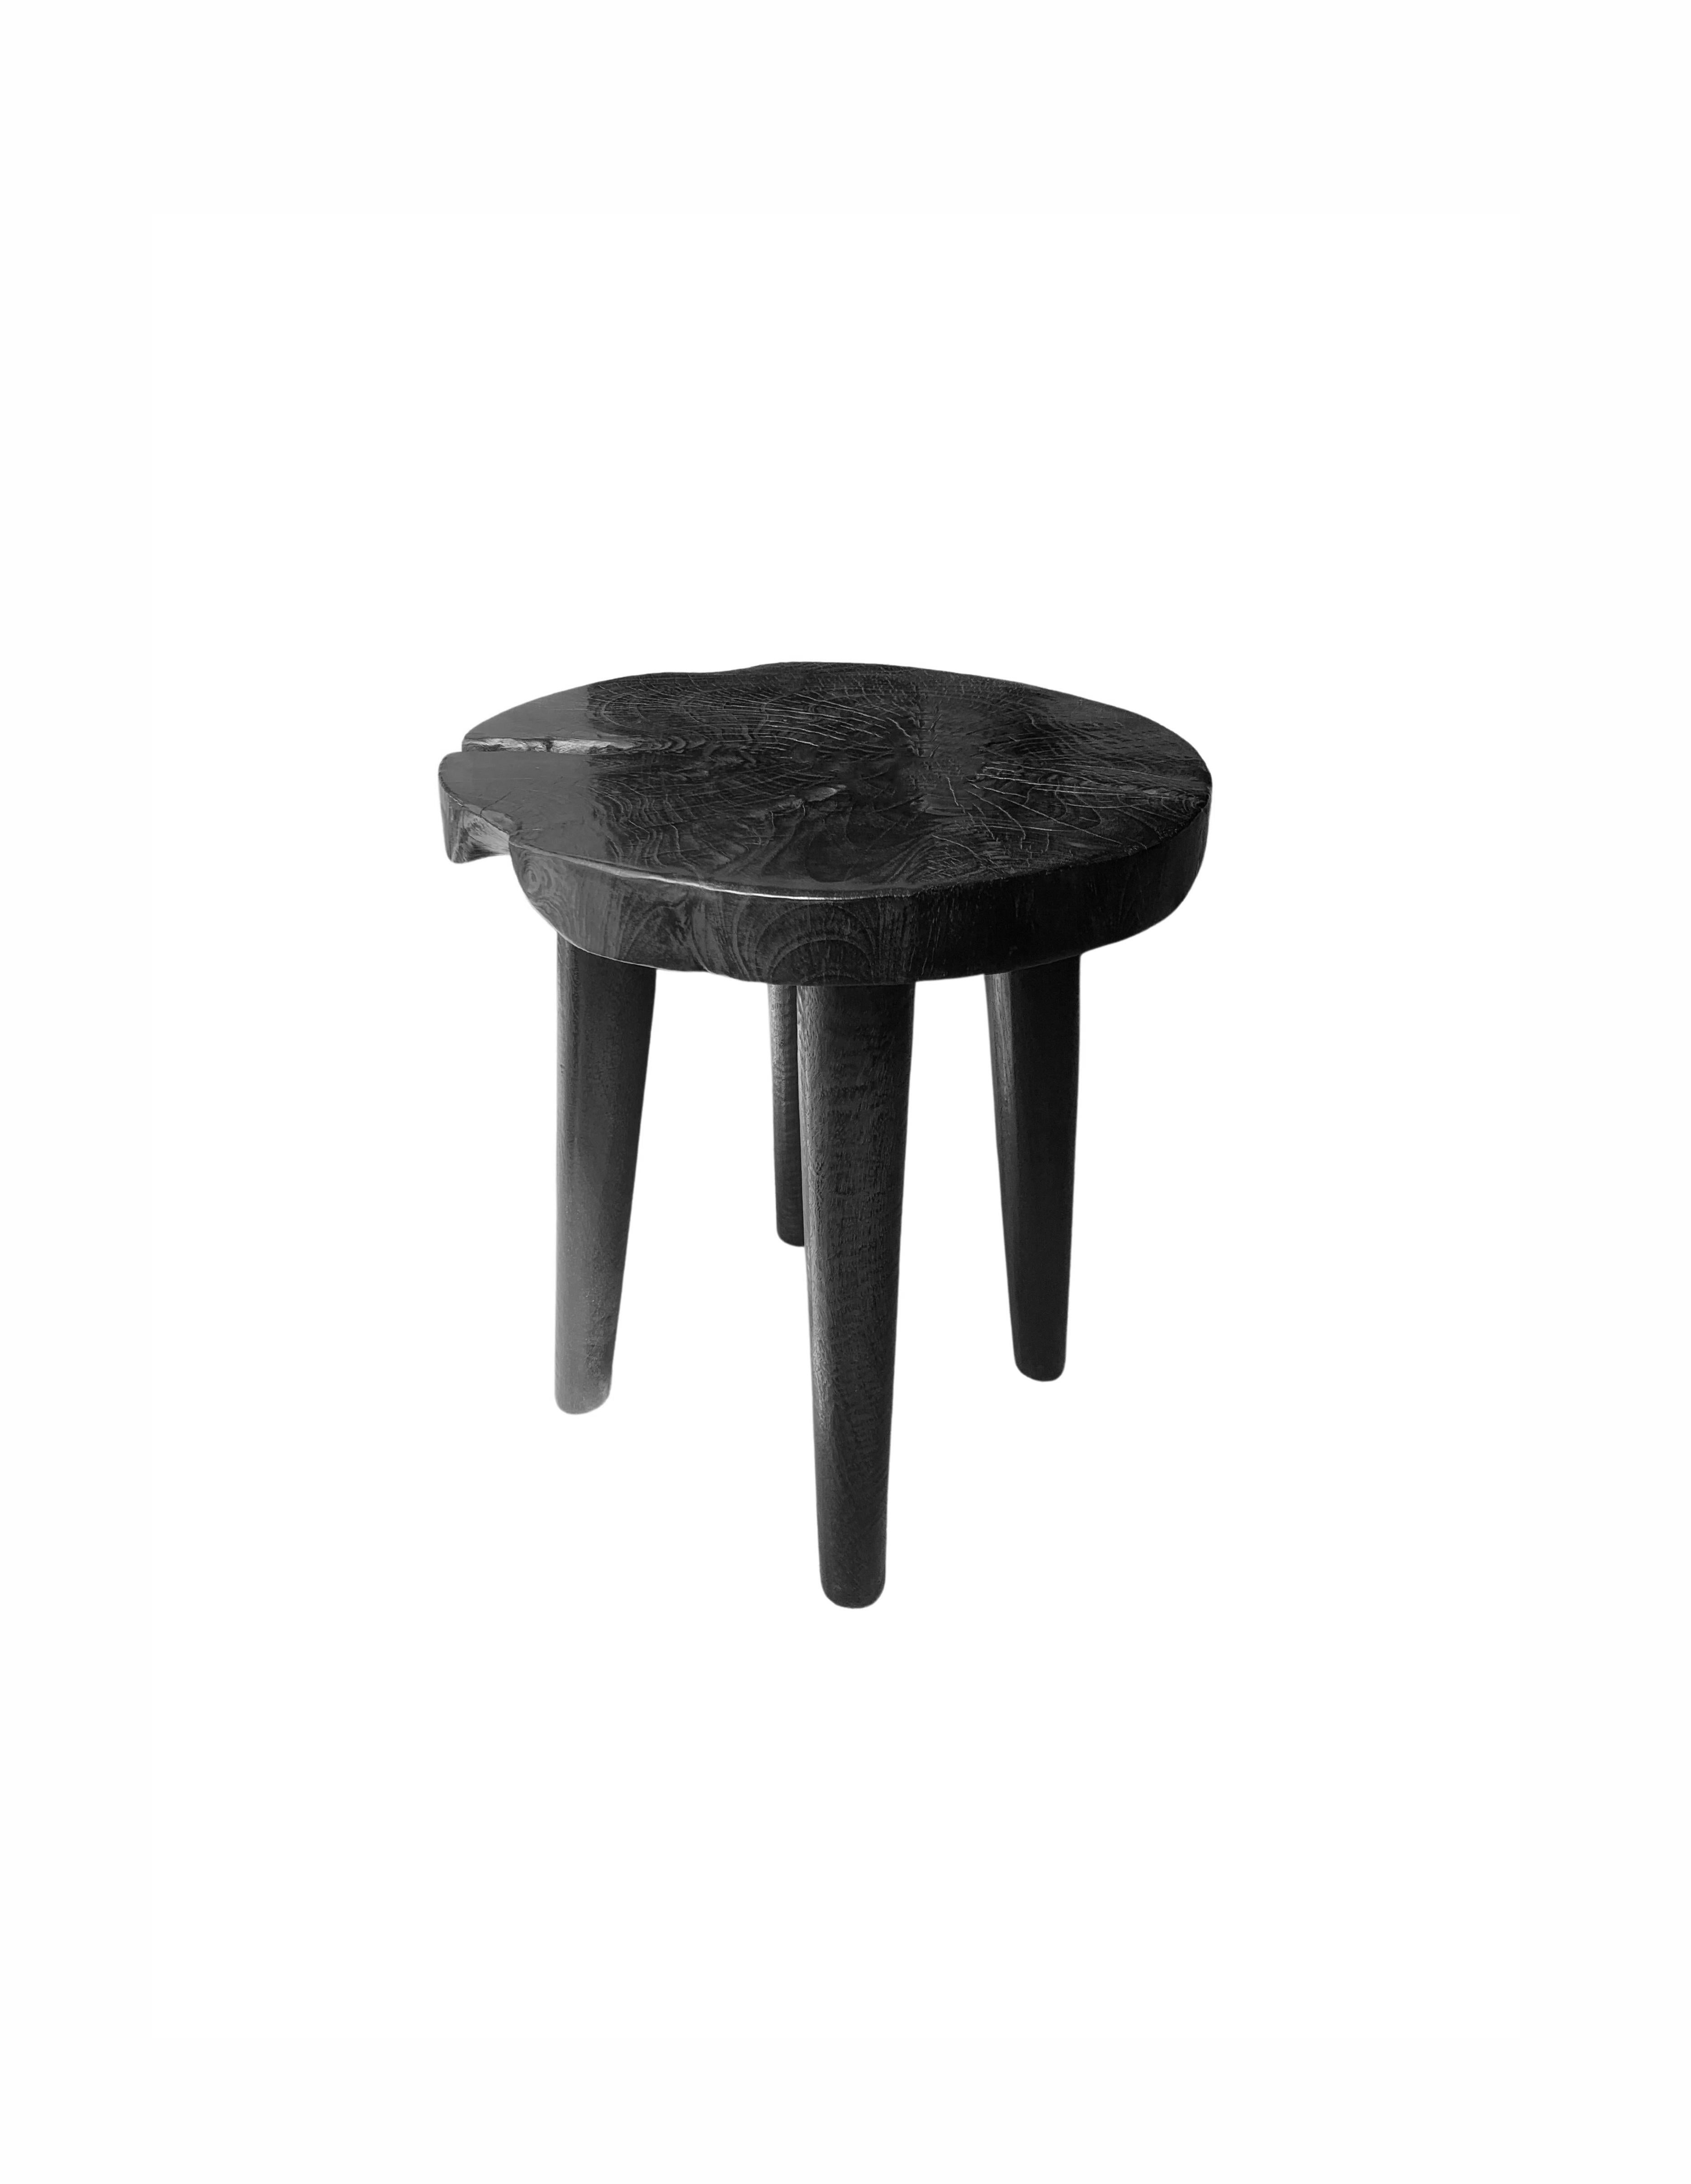 Sculptural Mango Wood Stool with Burnt Finish In New Condition For Sale In Jimbaran, Bali